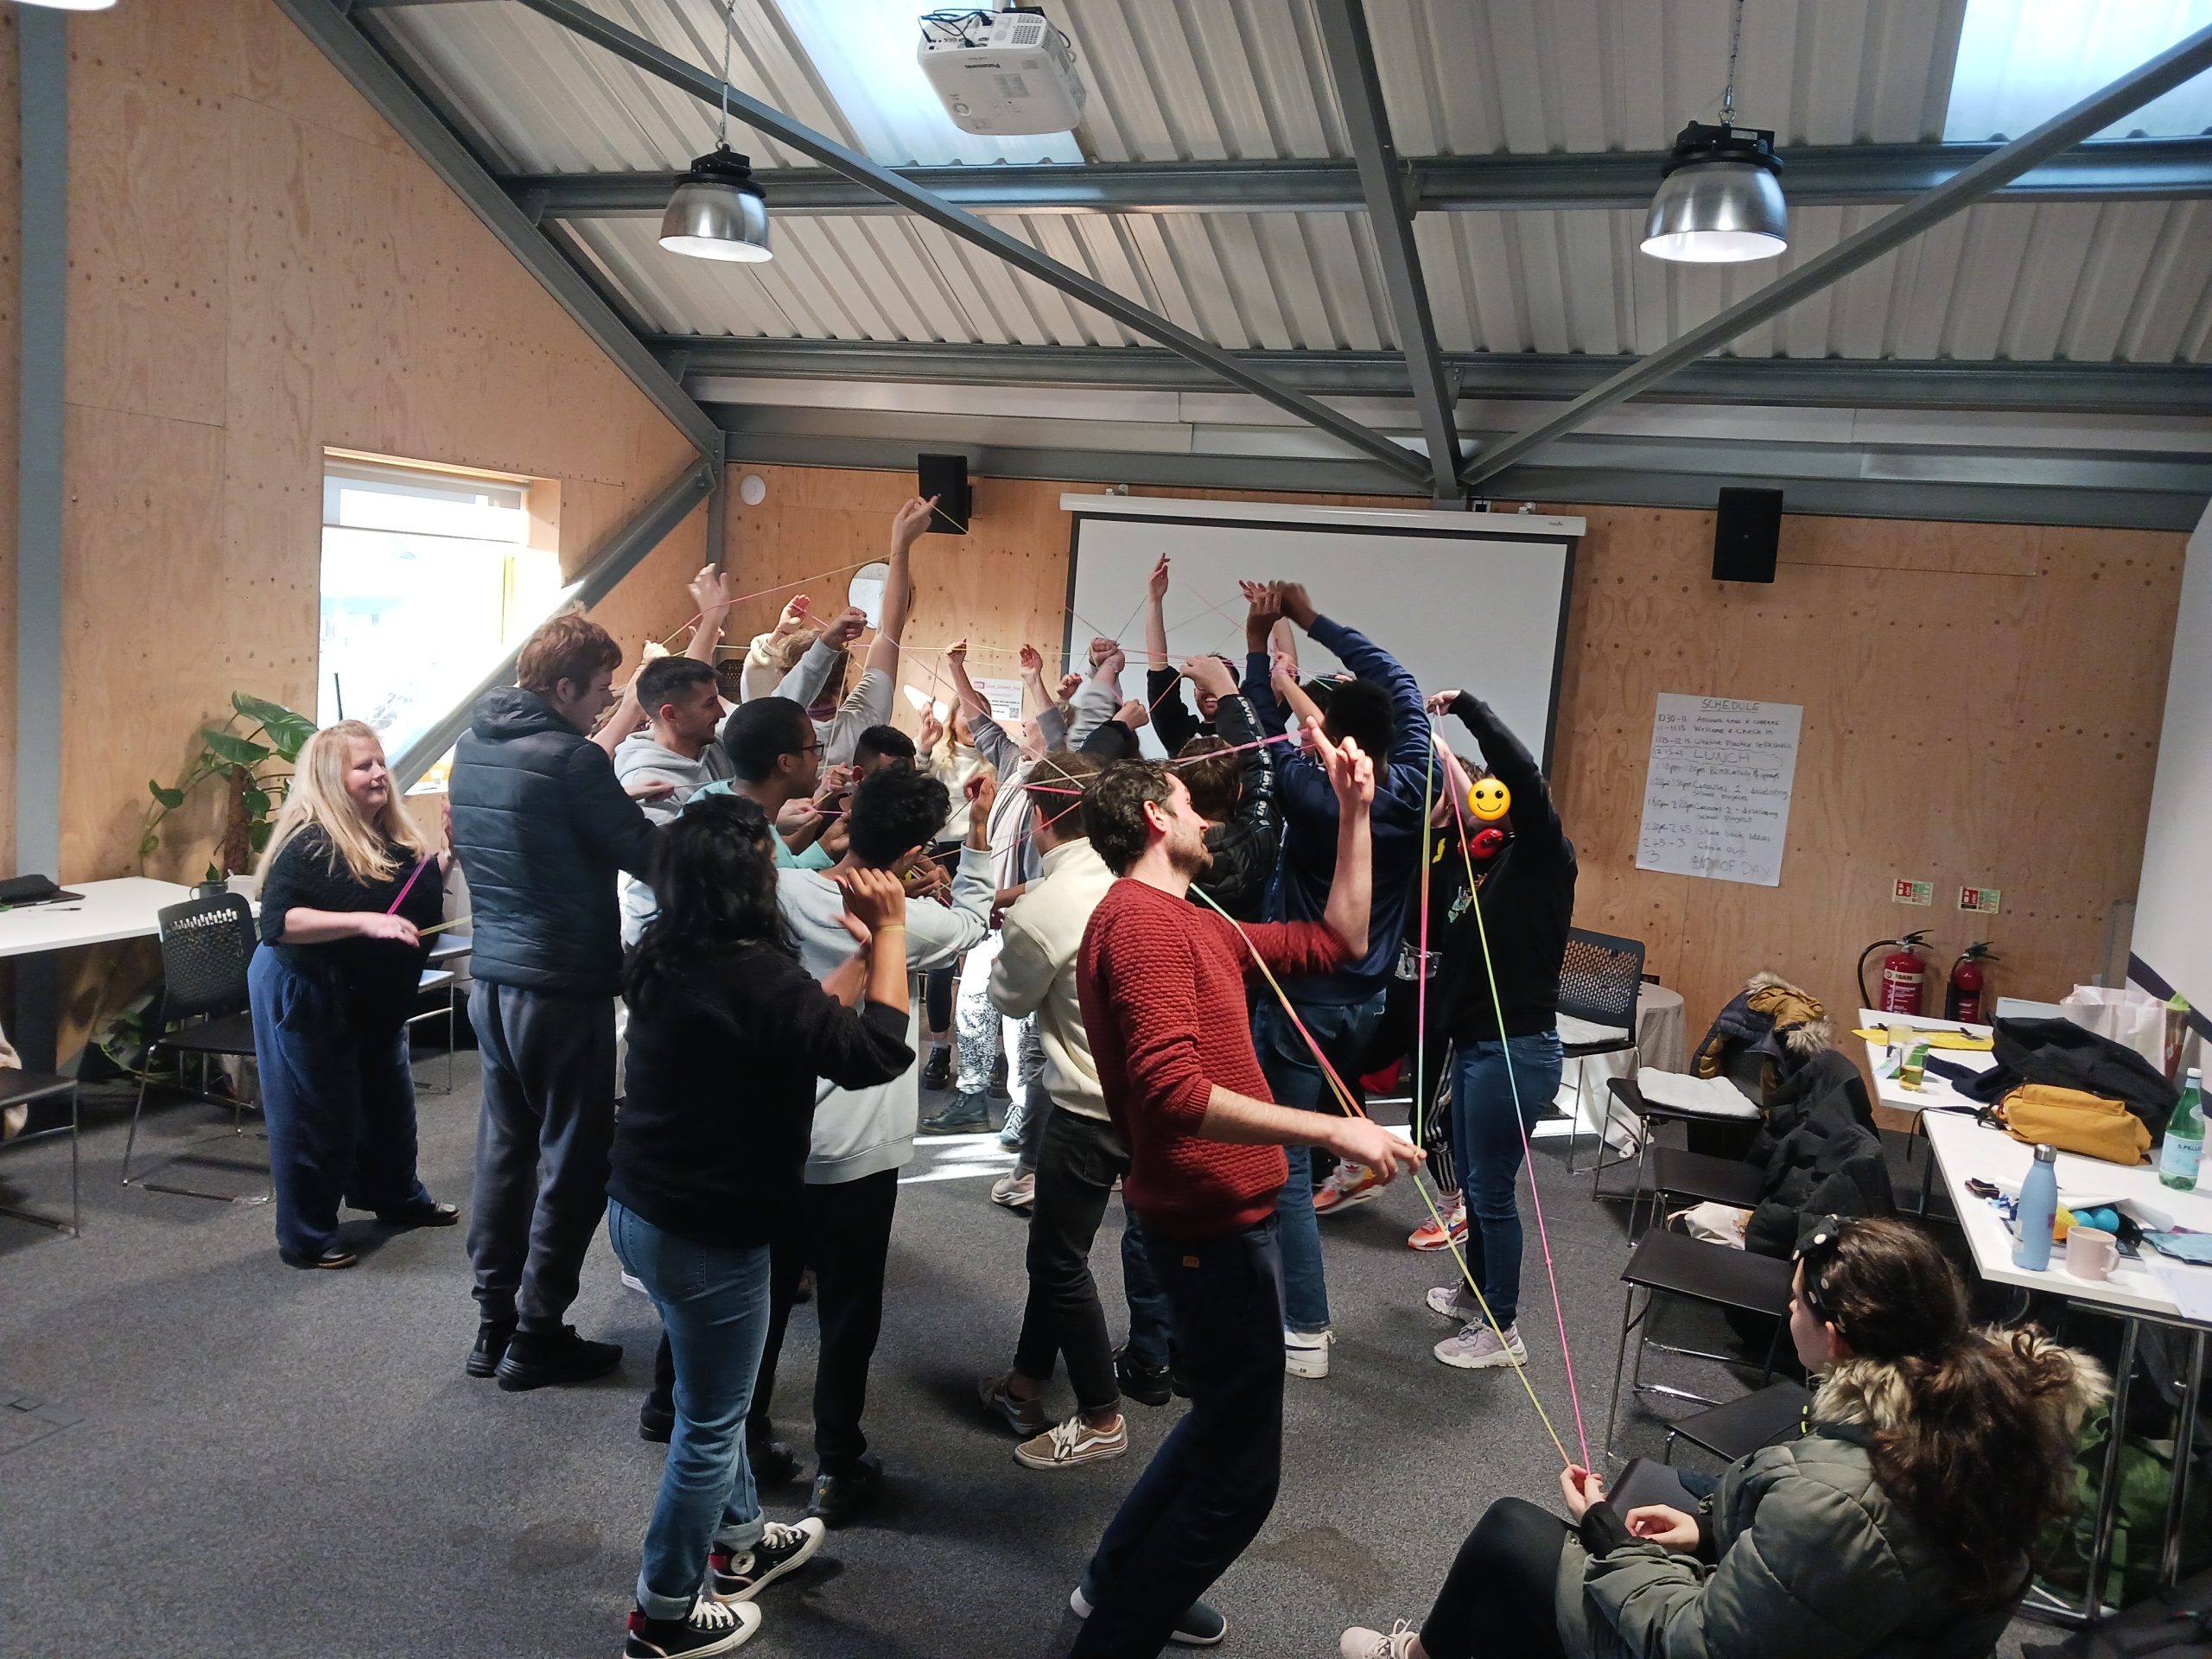 groupf of young people in a team building exercise collaborating and working together